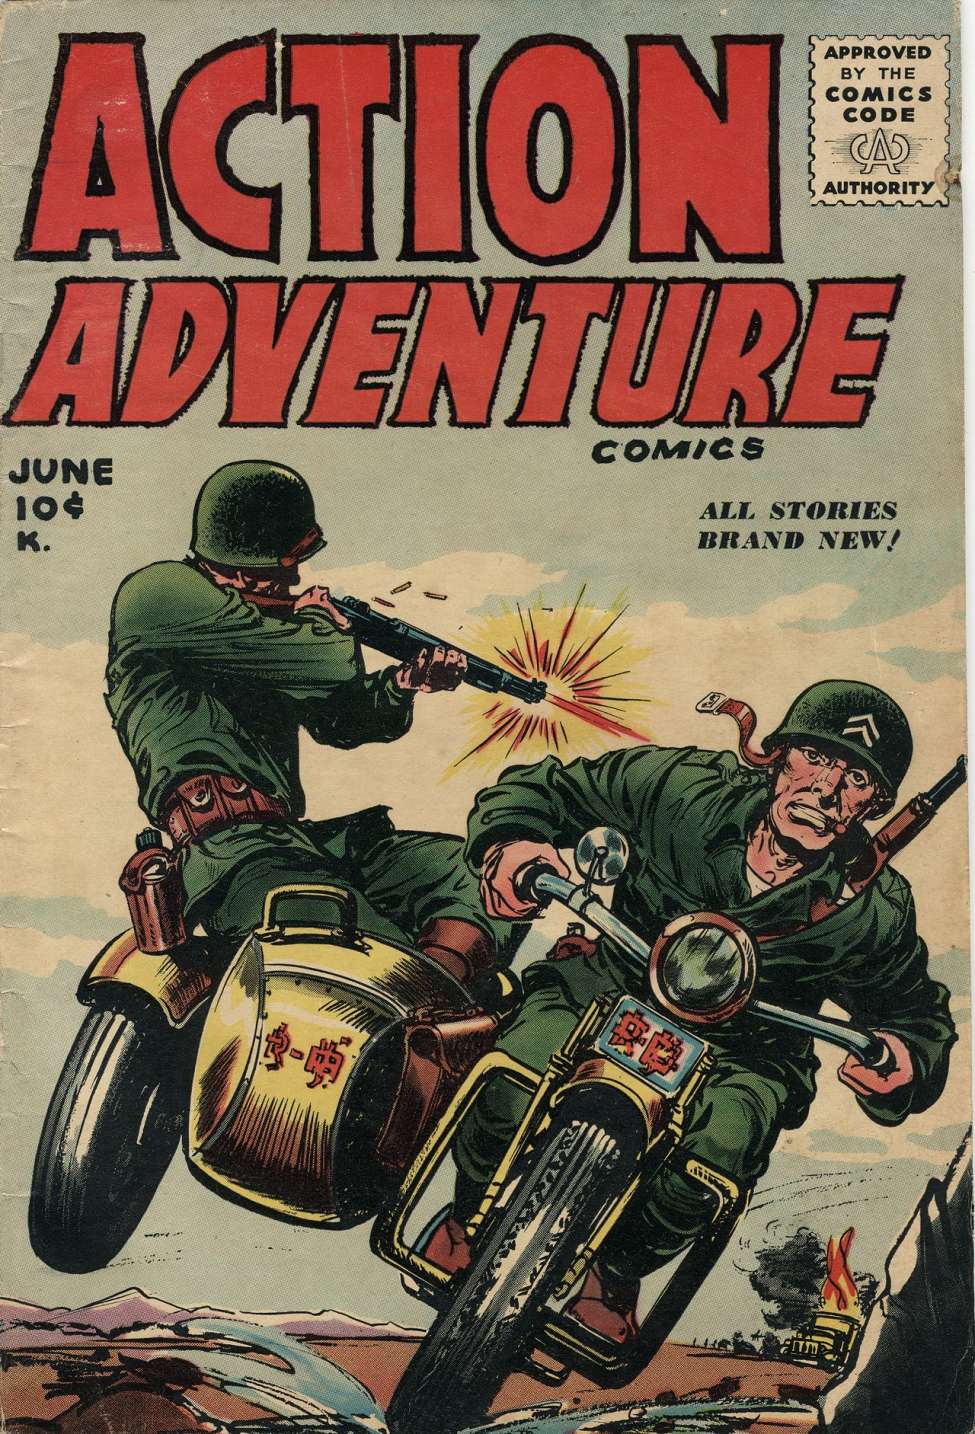 Book Cover For Action Adventure Comics 2 - Version 2